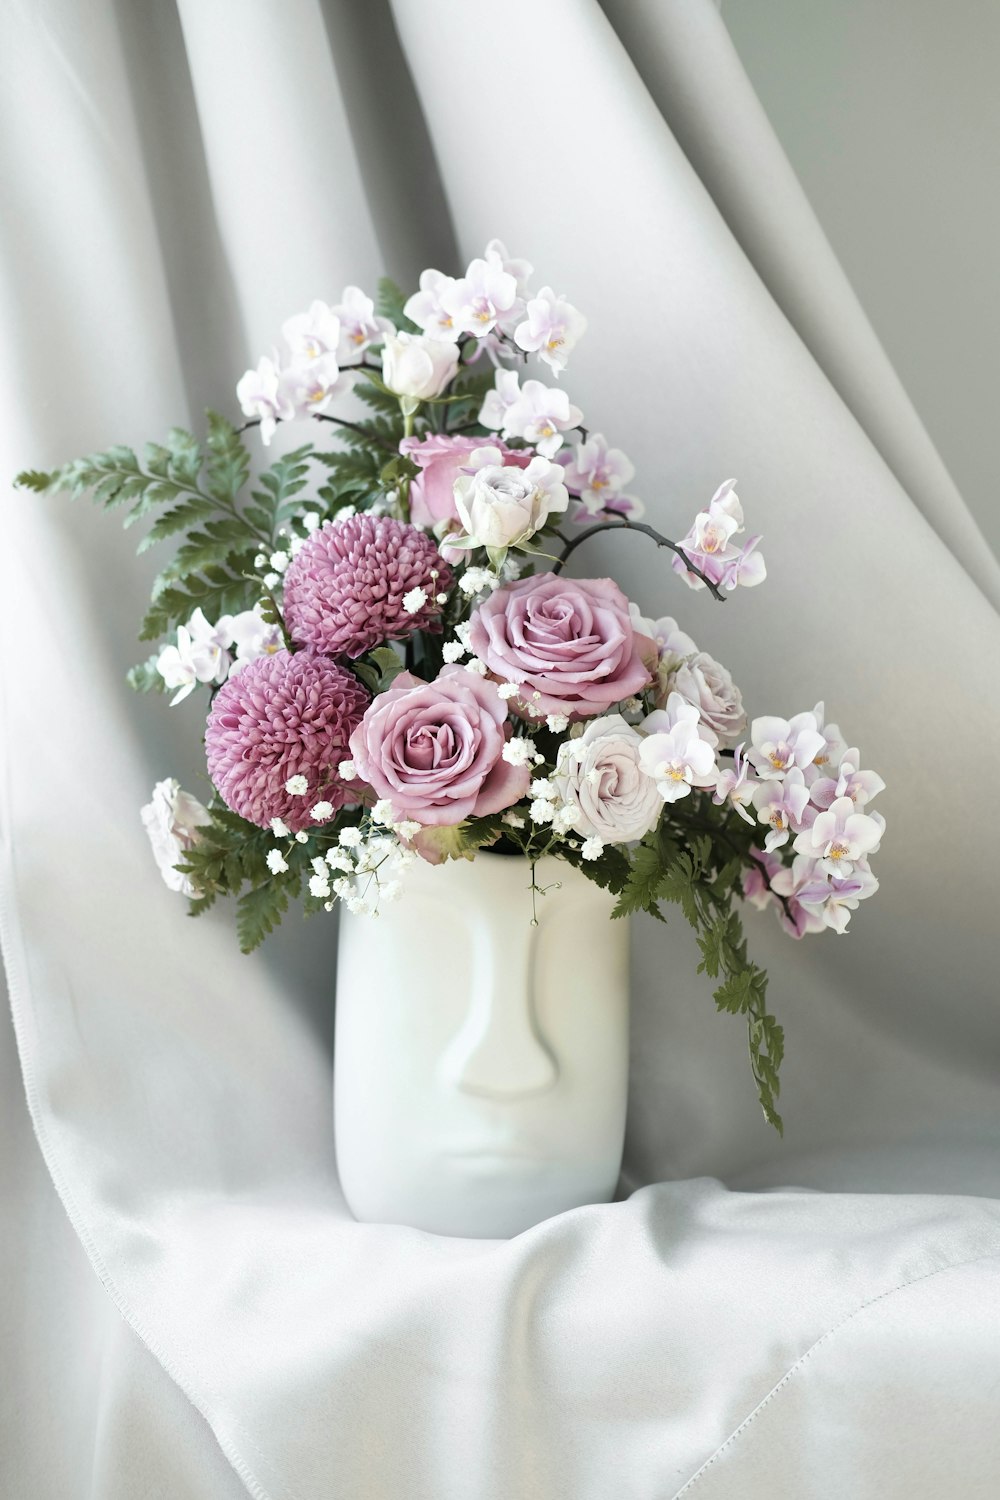 vase of pink-and-white-petaled flower